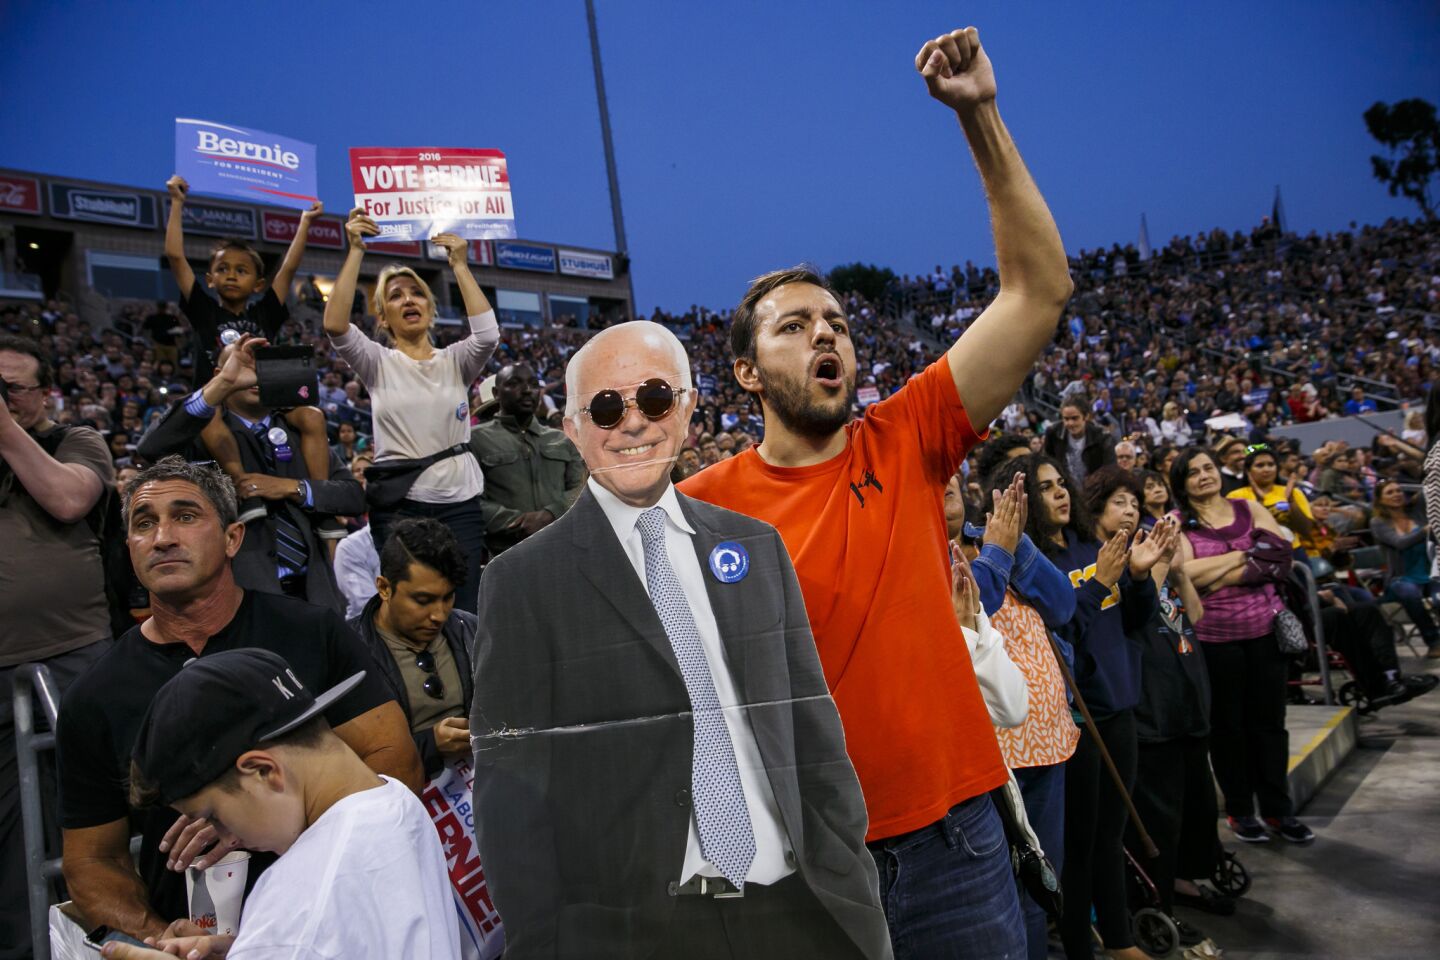 A lifesize Bernie Sanders cutout in the audience at Stubhub Center in Carson.